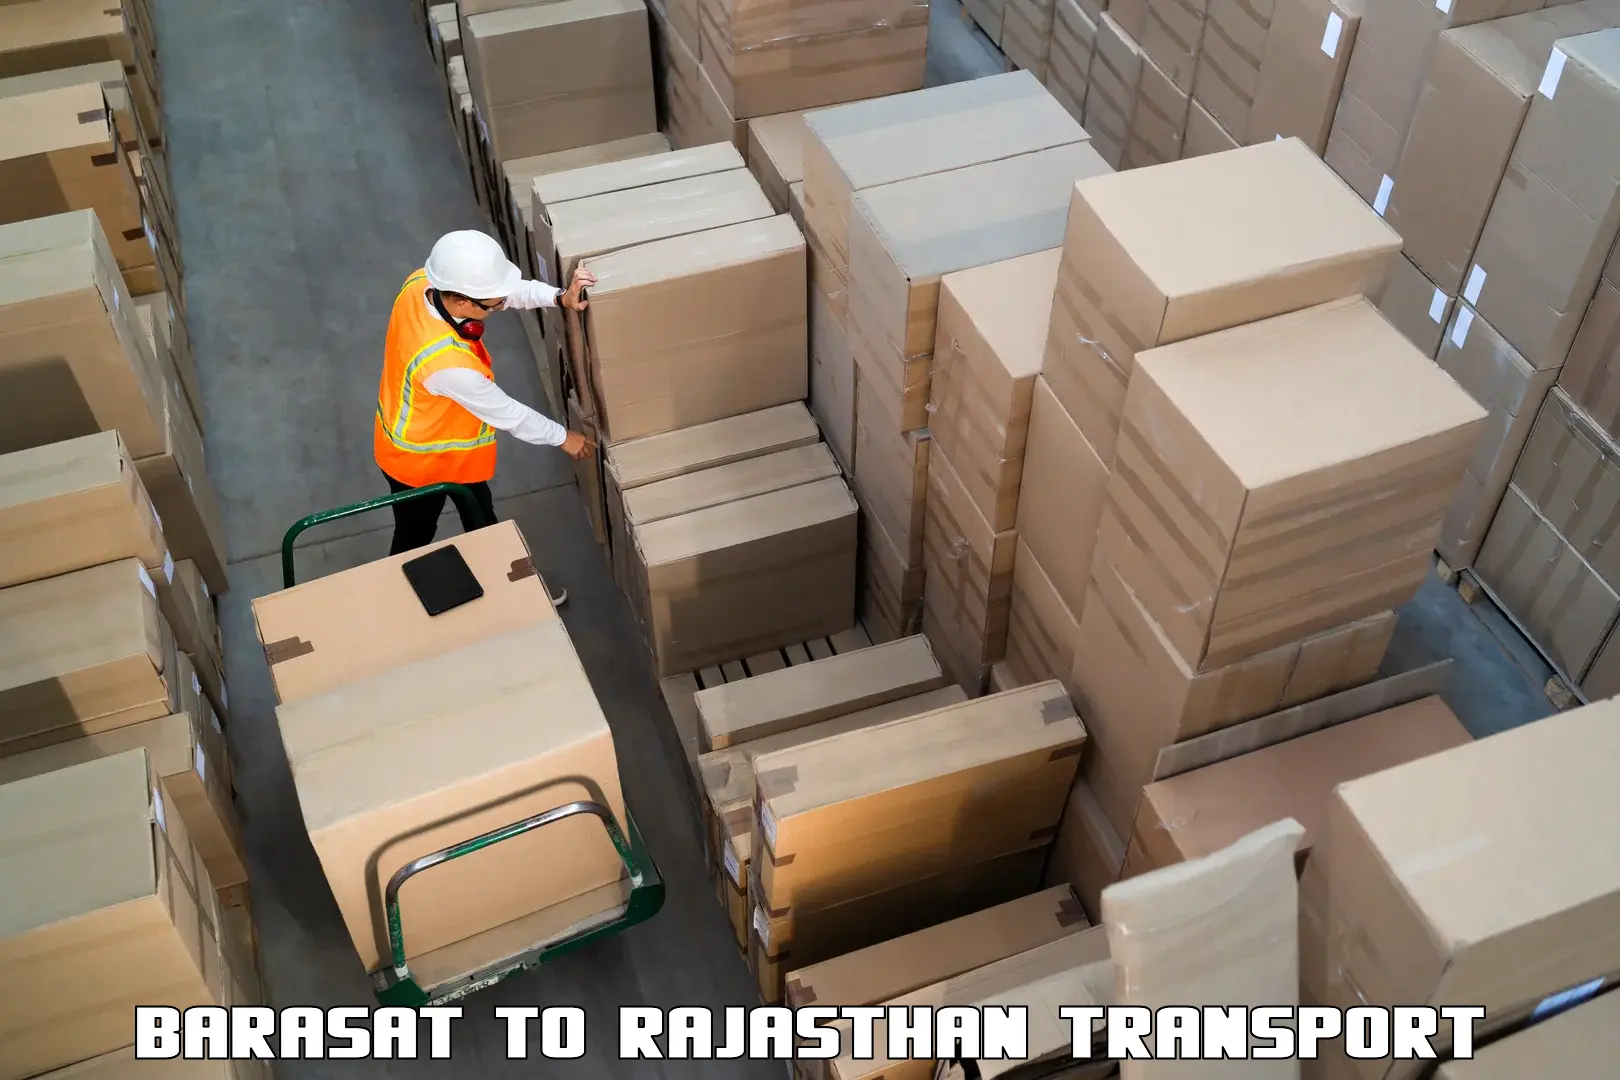 Commercial transport service Barasat to Piparcity